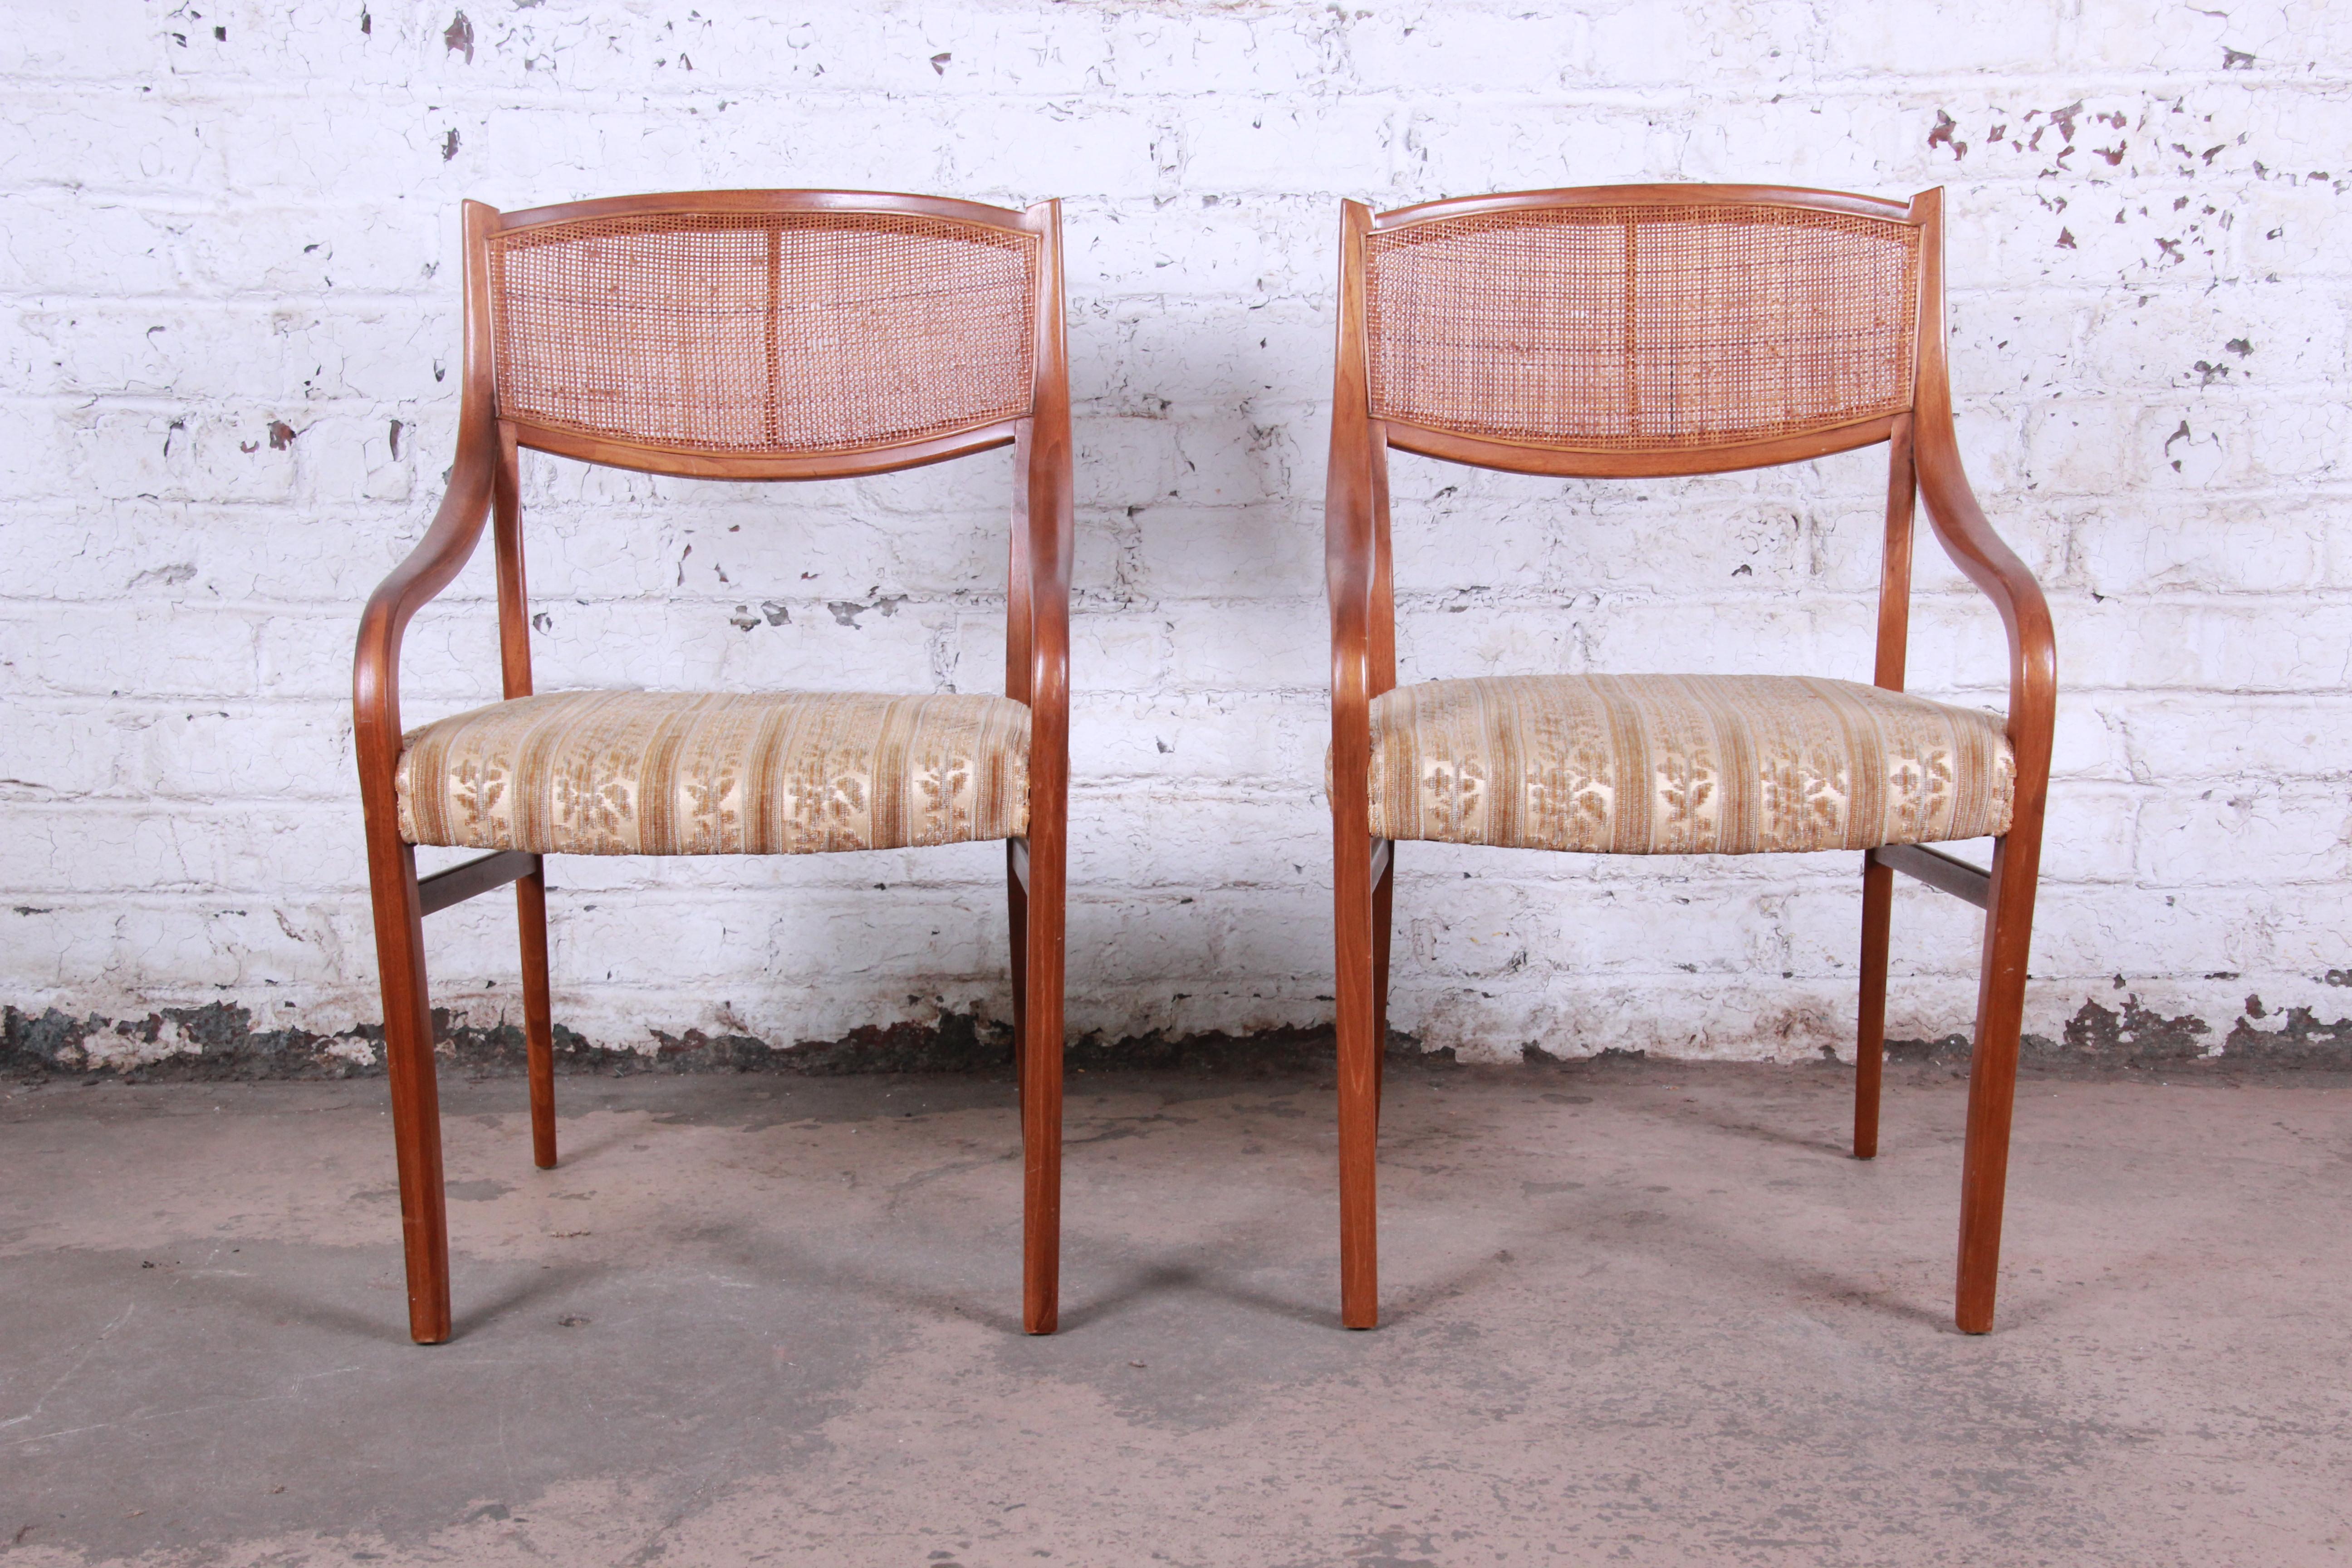 A rare and excellent pair of Mid-Century Modern walnut and cane armchairs designed by Barney Flagg for Drexel, circa 1960. The chairs feature gorgeous sculpted walnut frames, with caned seat backs. The original floral upholstery is clean and ready